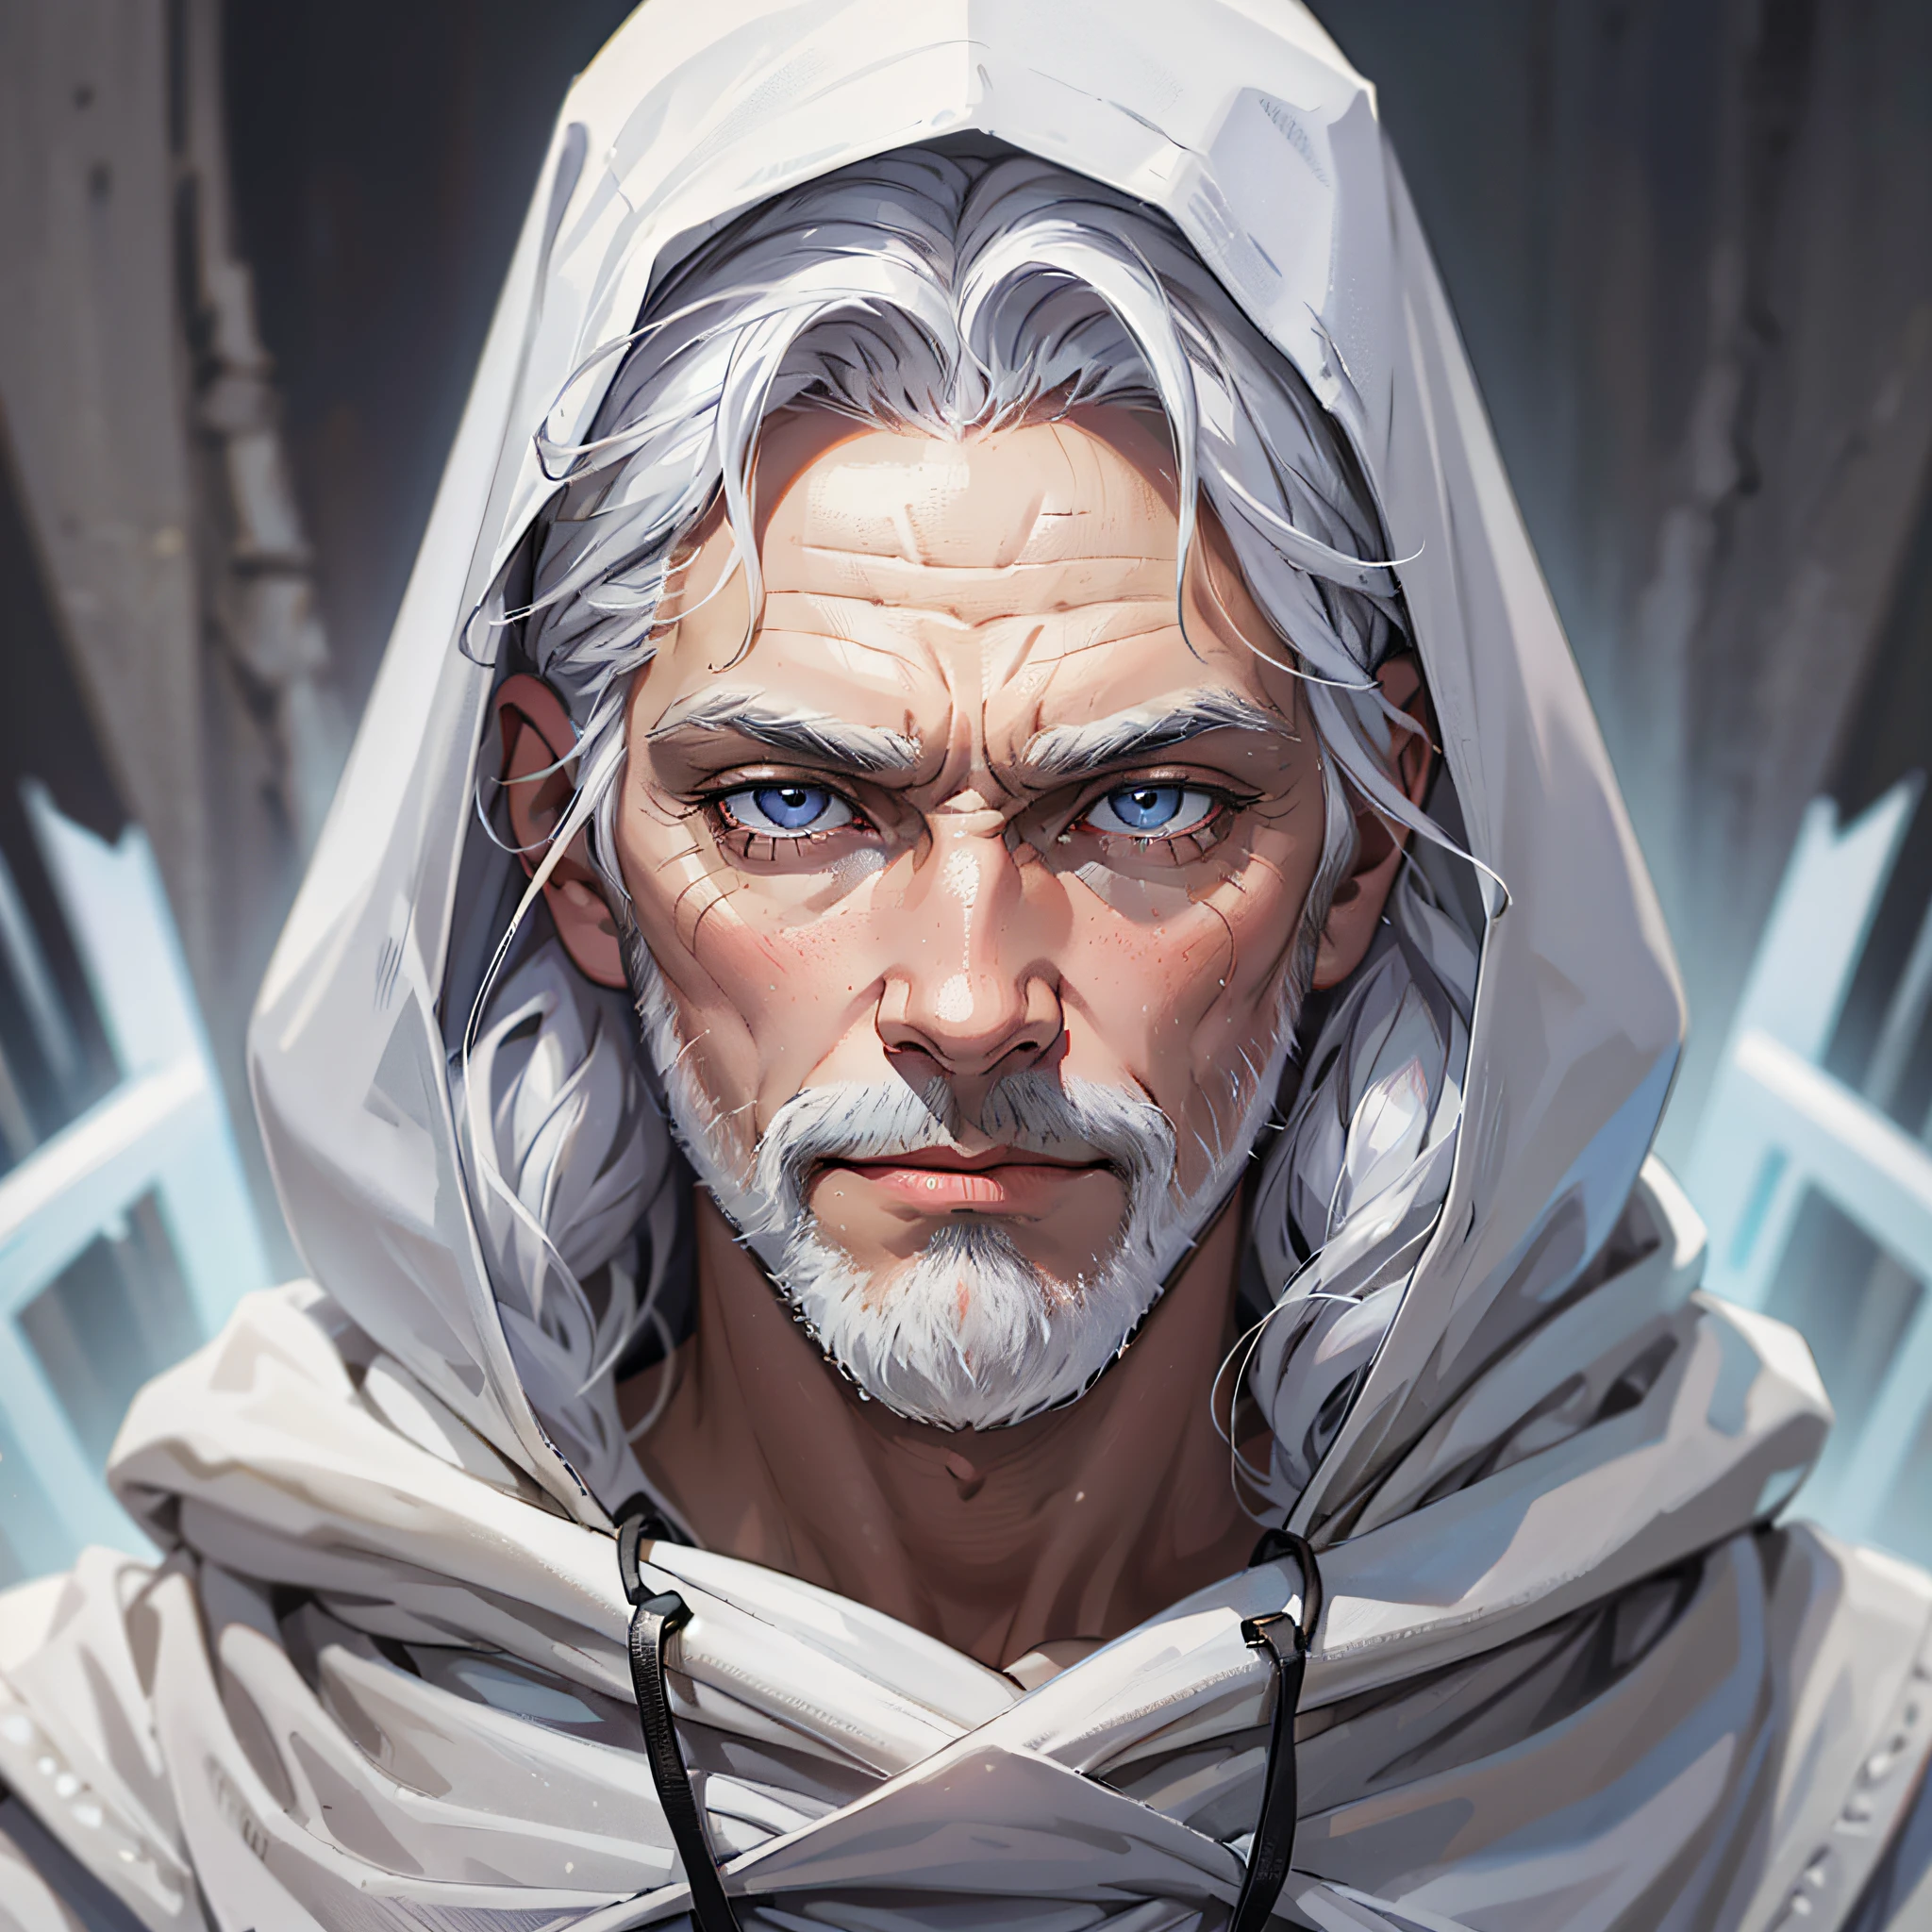 Portrait Rpg, close-up, Race: Human, Gender: Male, Male; Age: 50 years; Eyes: completely white without irises; Skin color: Frozen skin, Hair: Light gray, Physique: slim build, Facial features: White beard and various Cicatrix, Expression: Determined look, Equipment: white linen clothing with hood, Background: Ice, (Masterpiece, best quality, high: 1.4), detailed, intricate details, 4K, splashes of color, line art, fibonacci